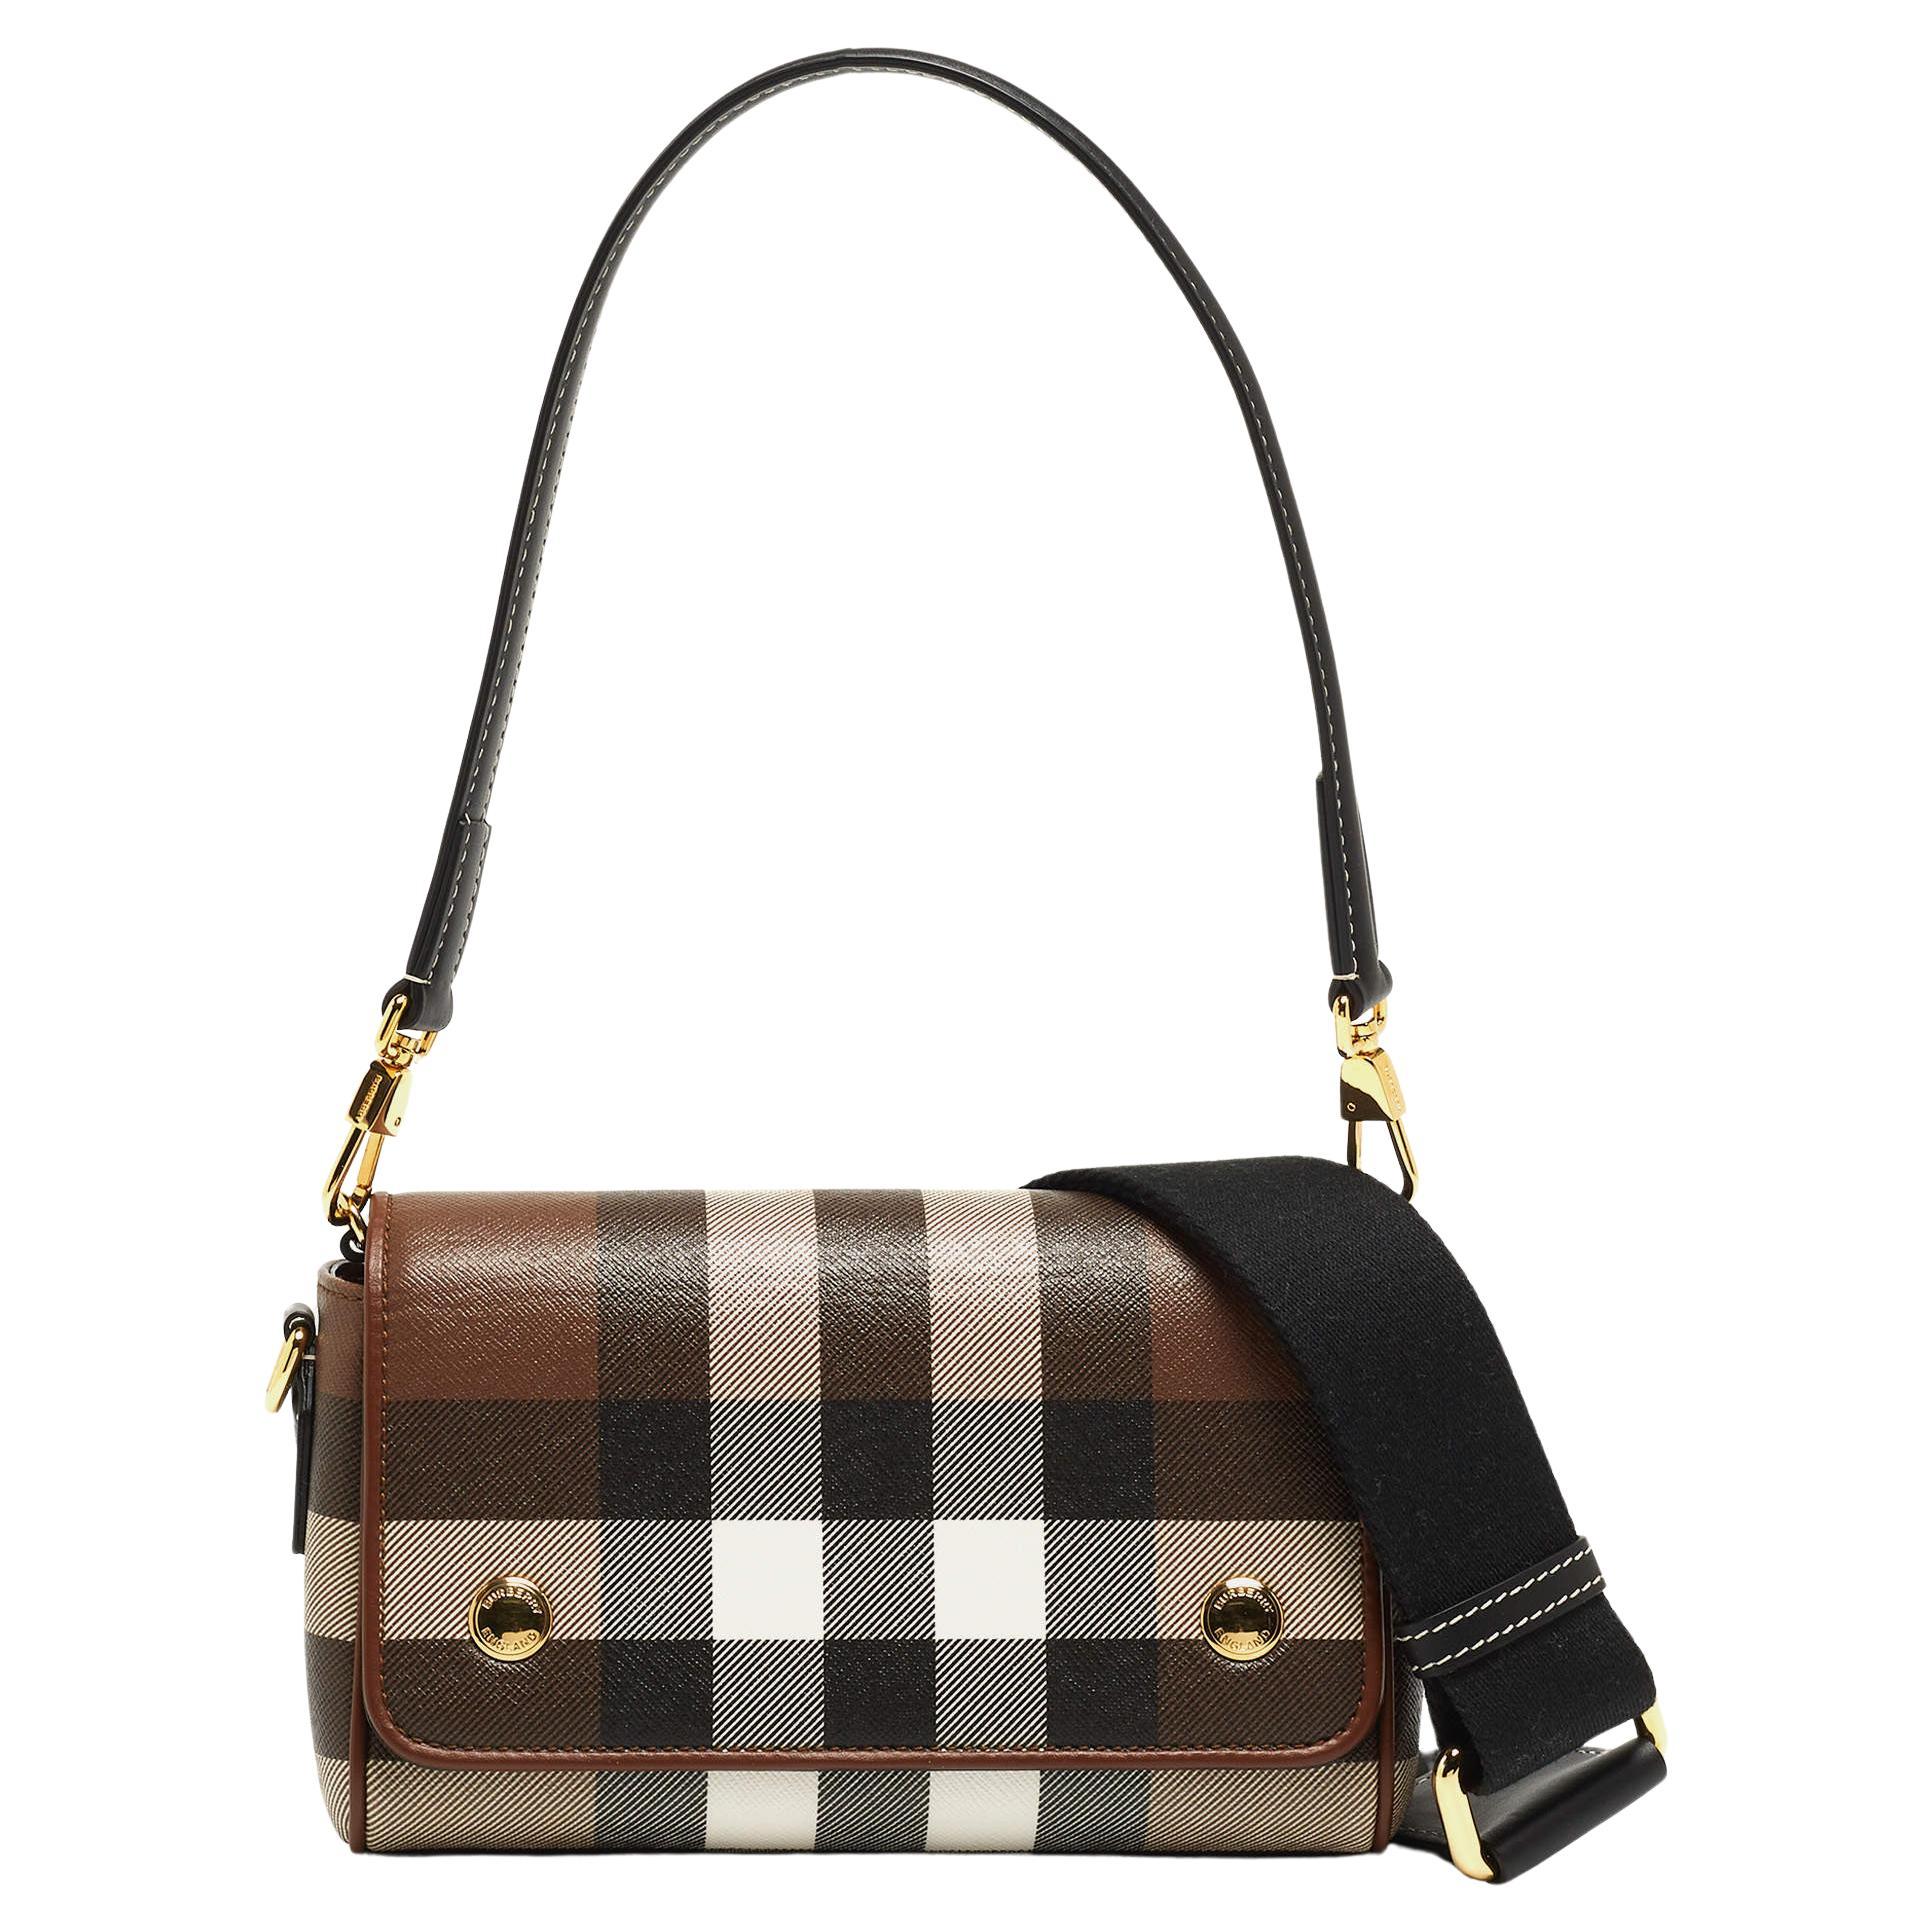 Burberry Brown/Black Check Coated Canvas and Leather Dorset Shoulder Bag